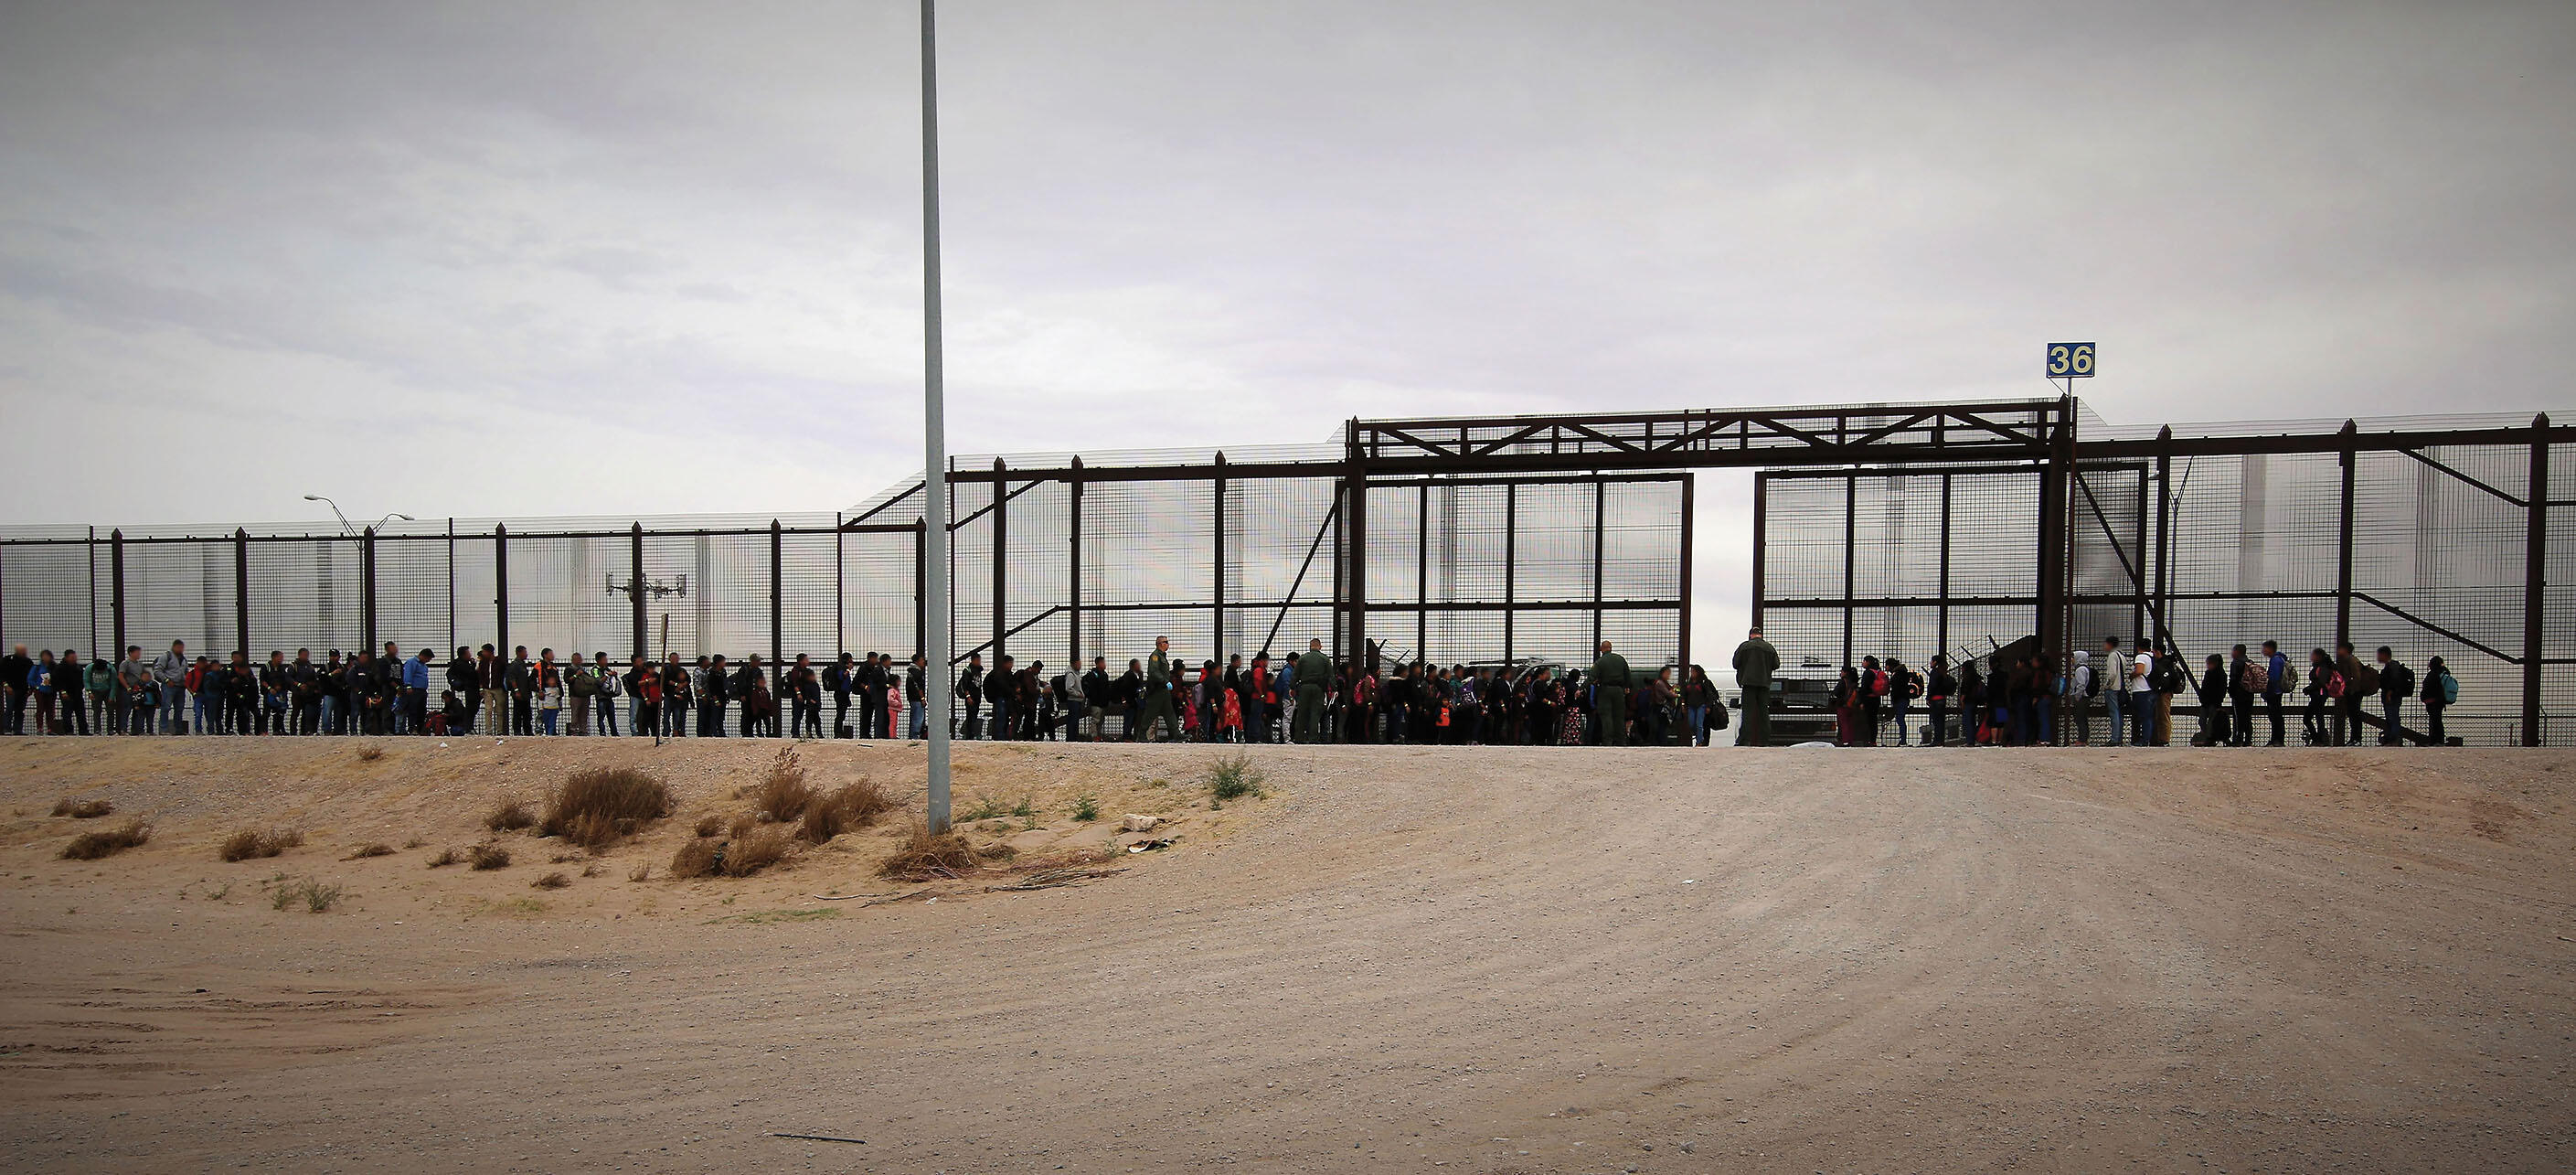 Border patrol agents process a group of migrants in El Paso, Texas, March 2019. (Photo by Jaime Rodriguez Sr./Customs and Border Patrol.)